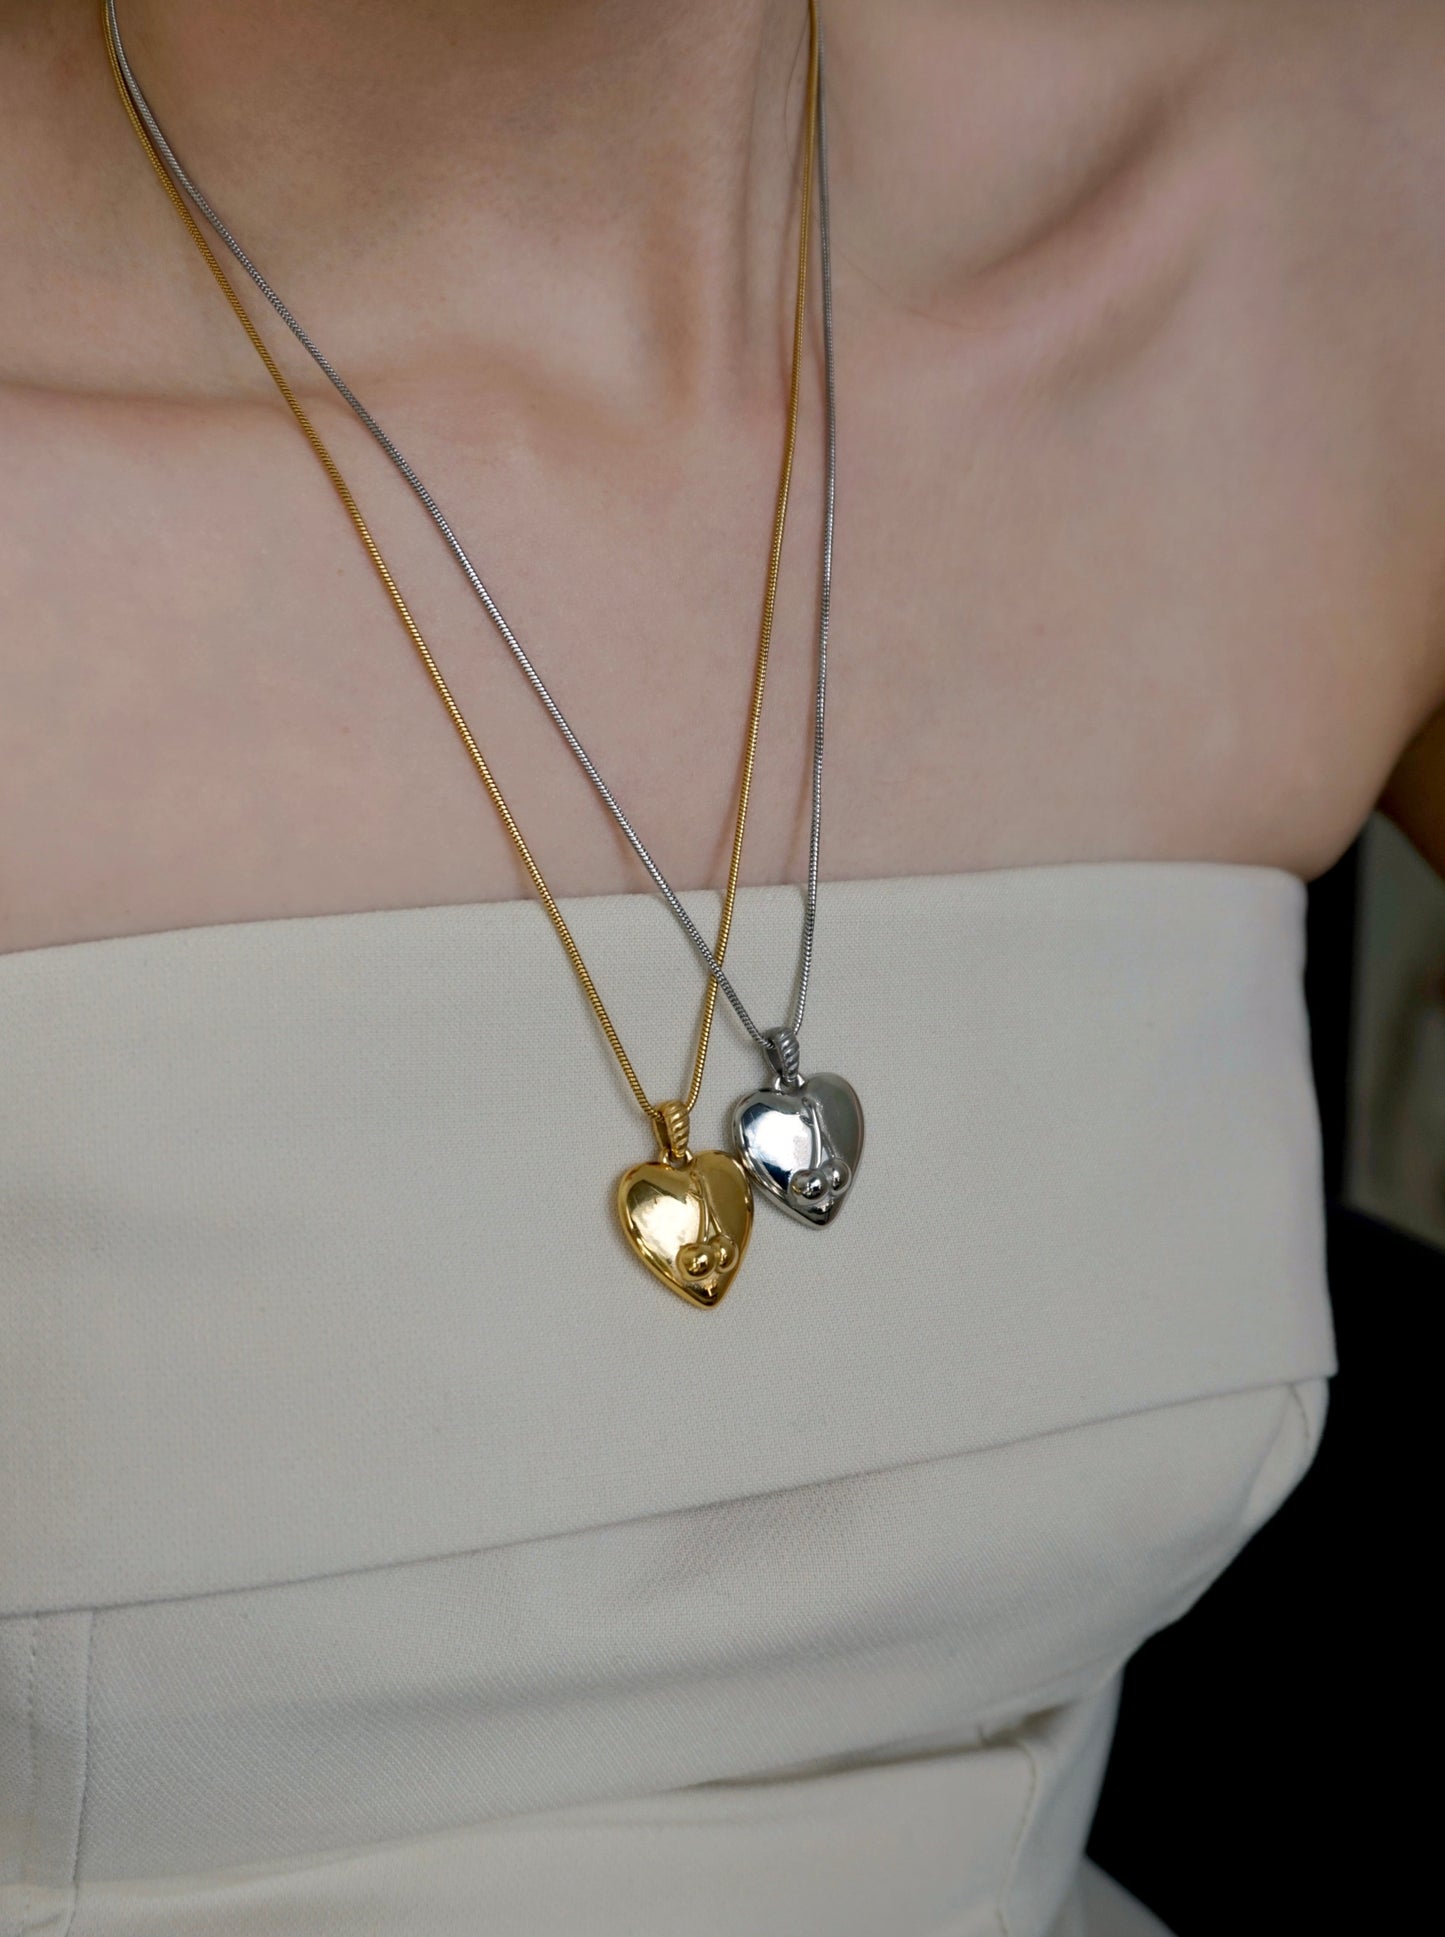 Cherry Heart Necklace in Gold